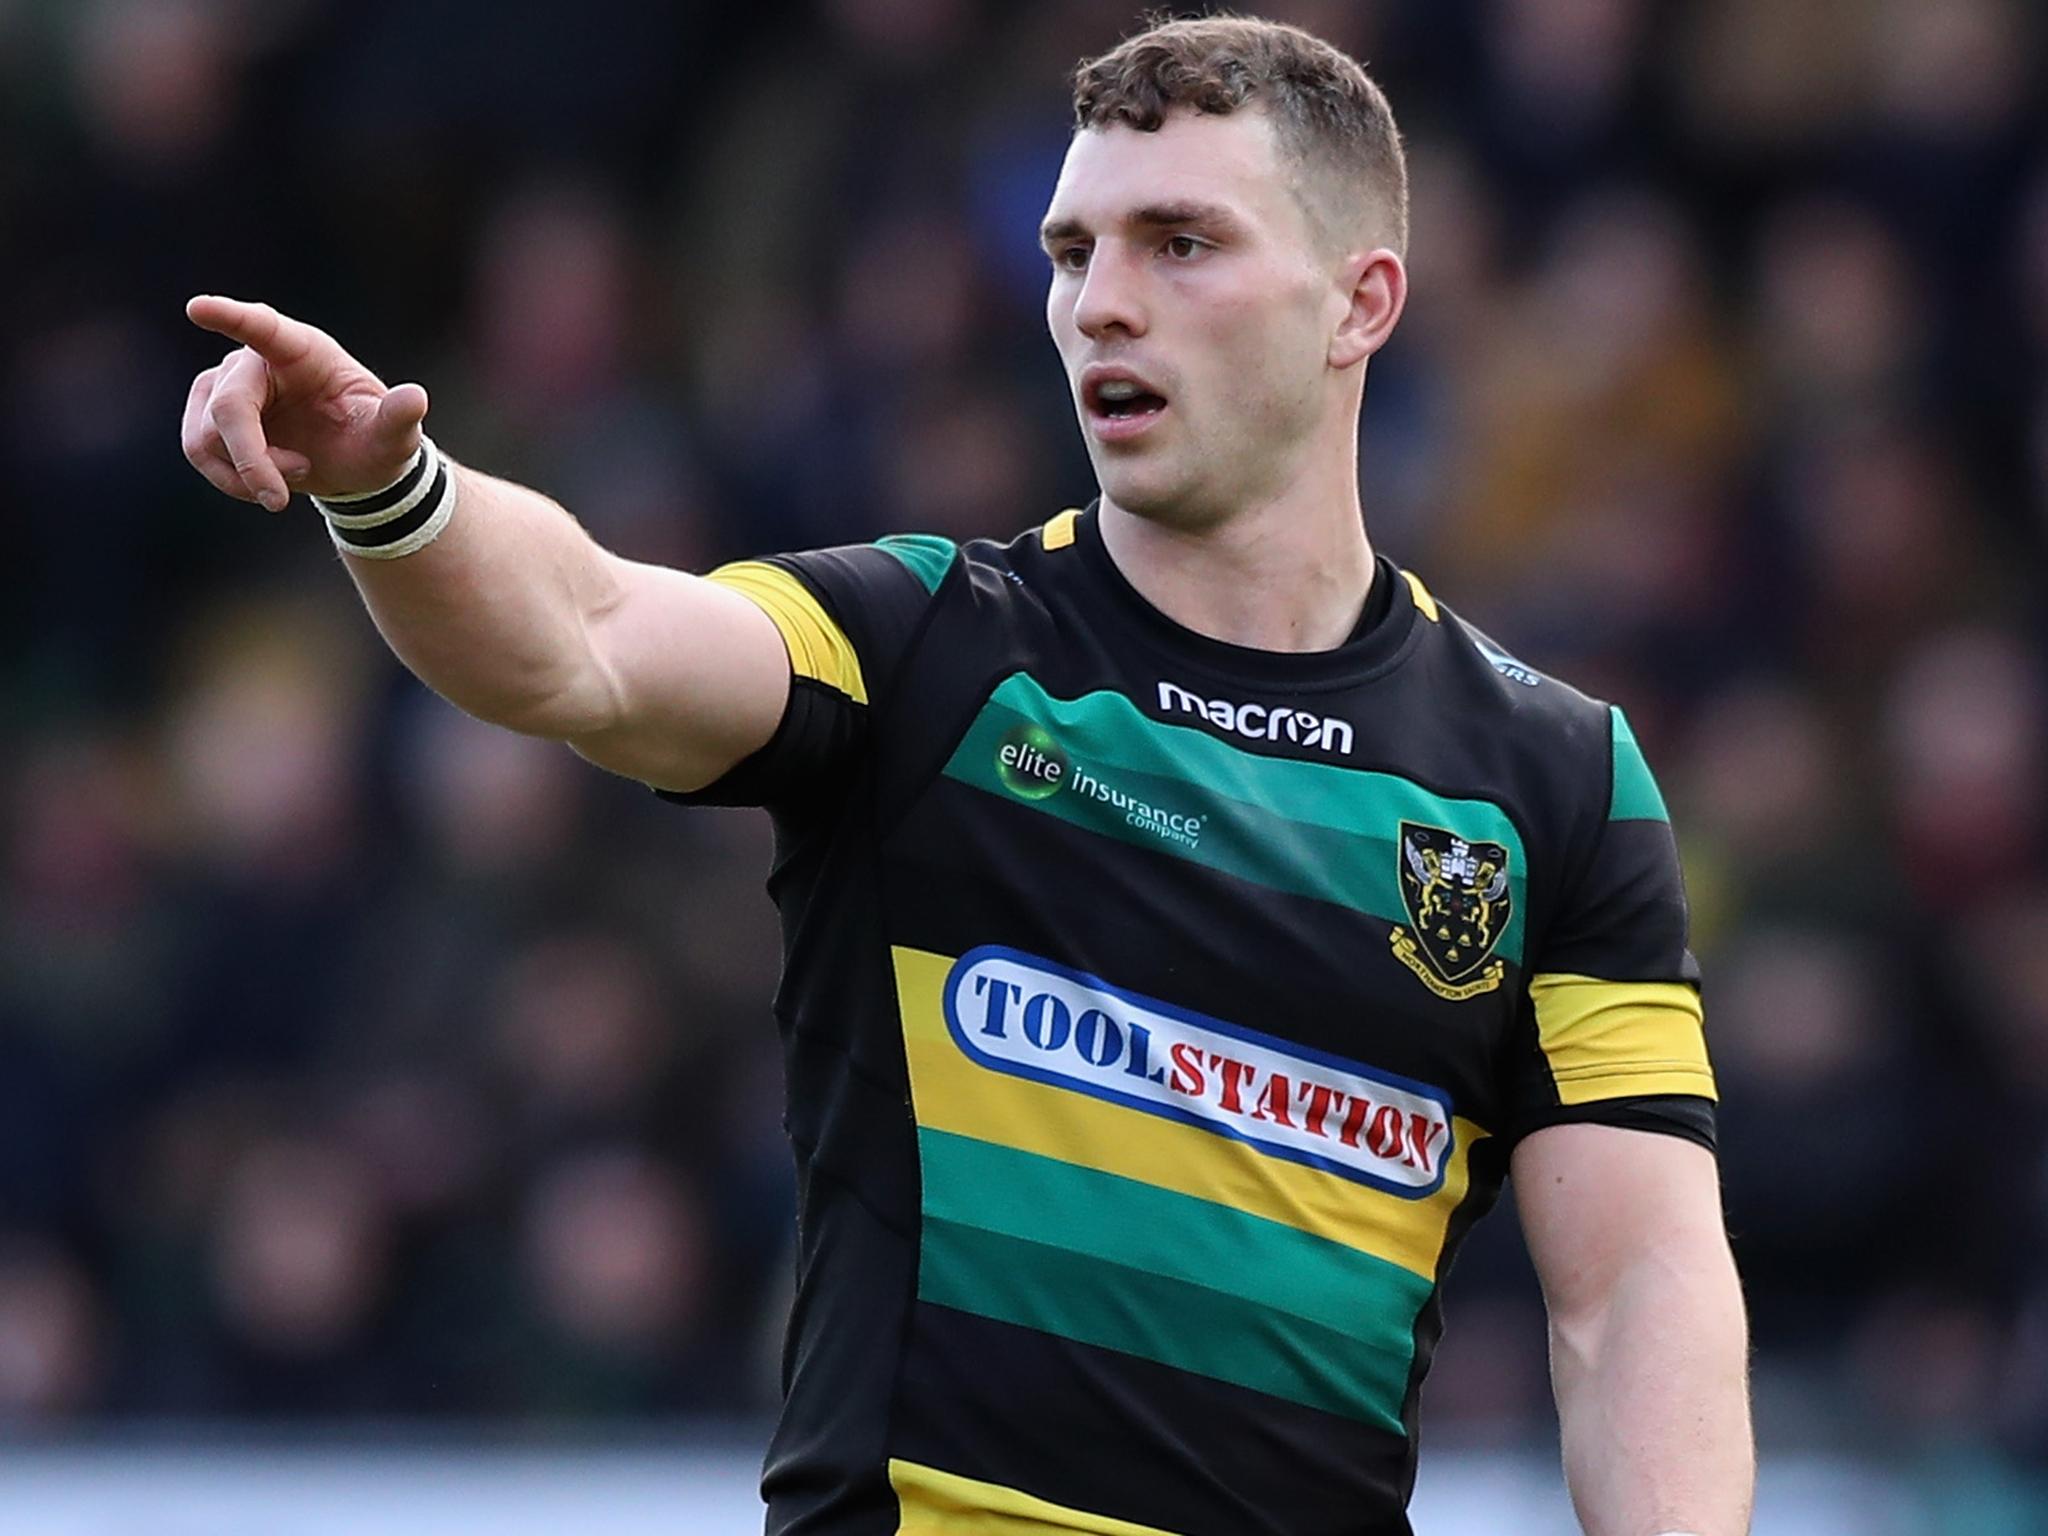 George North has been disciplined by Northampton Saints for missing a training session